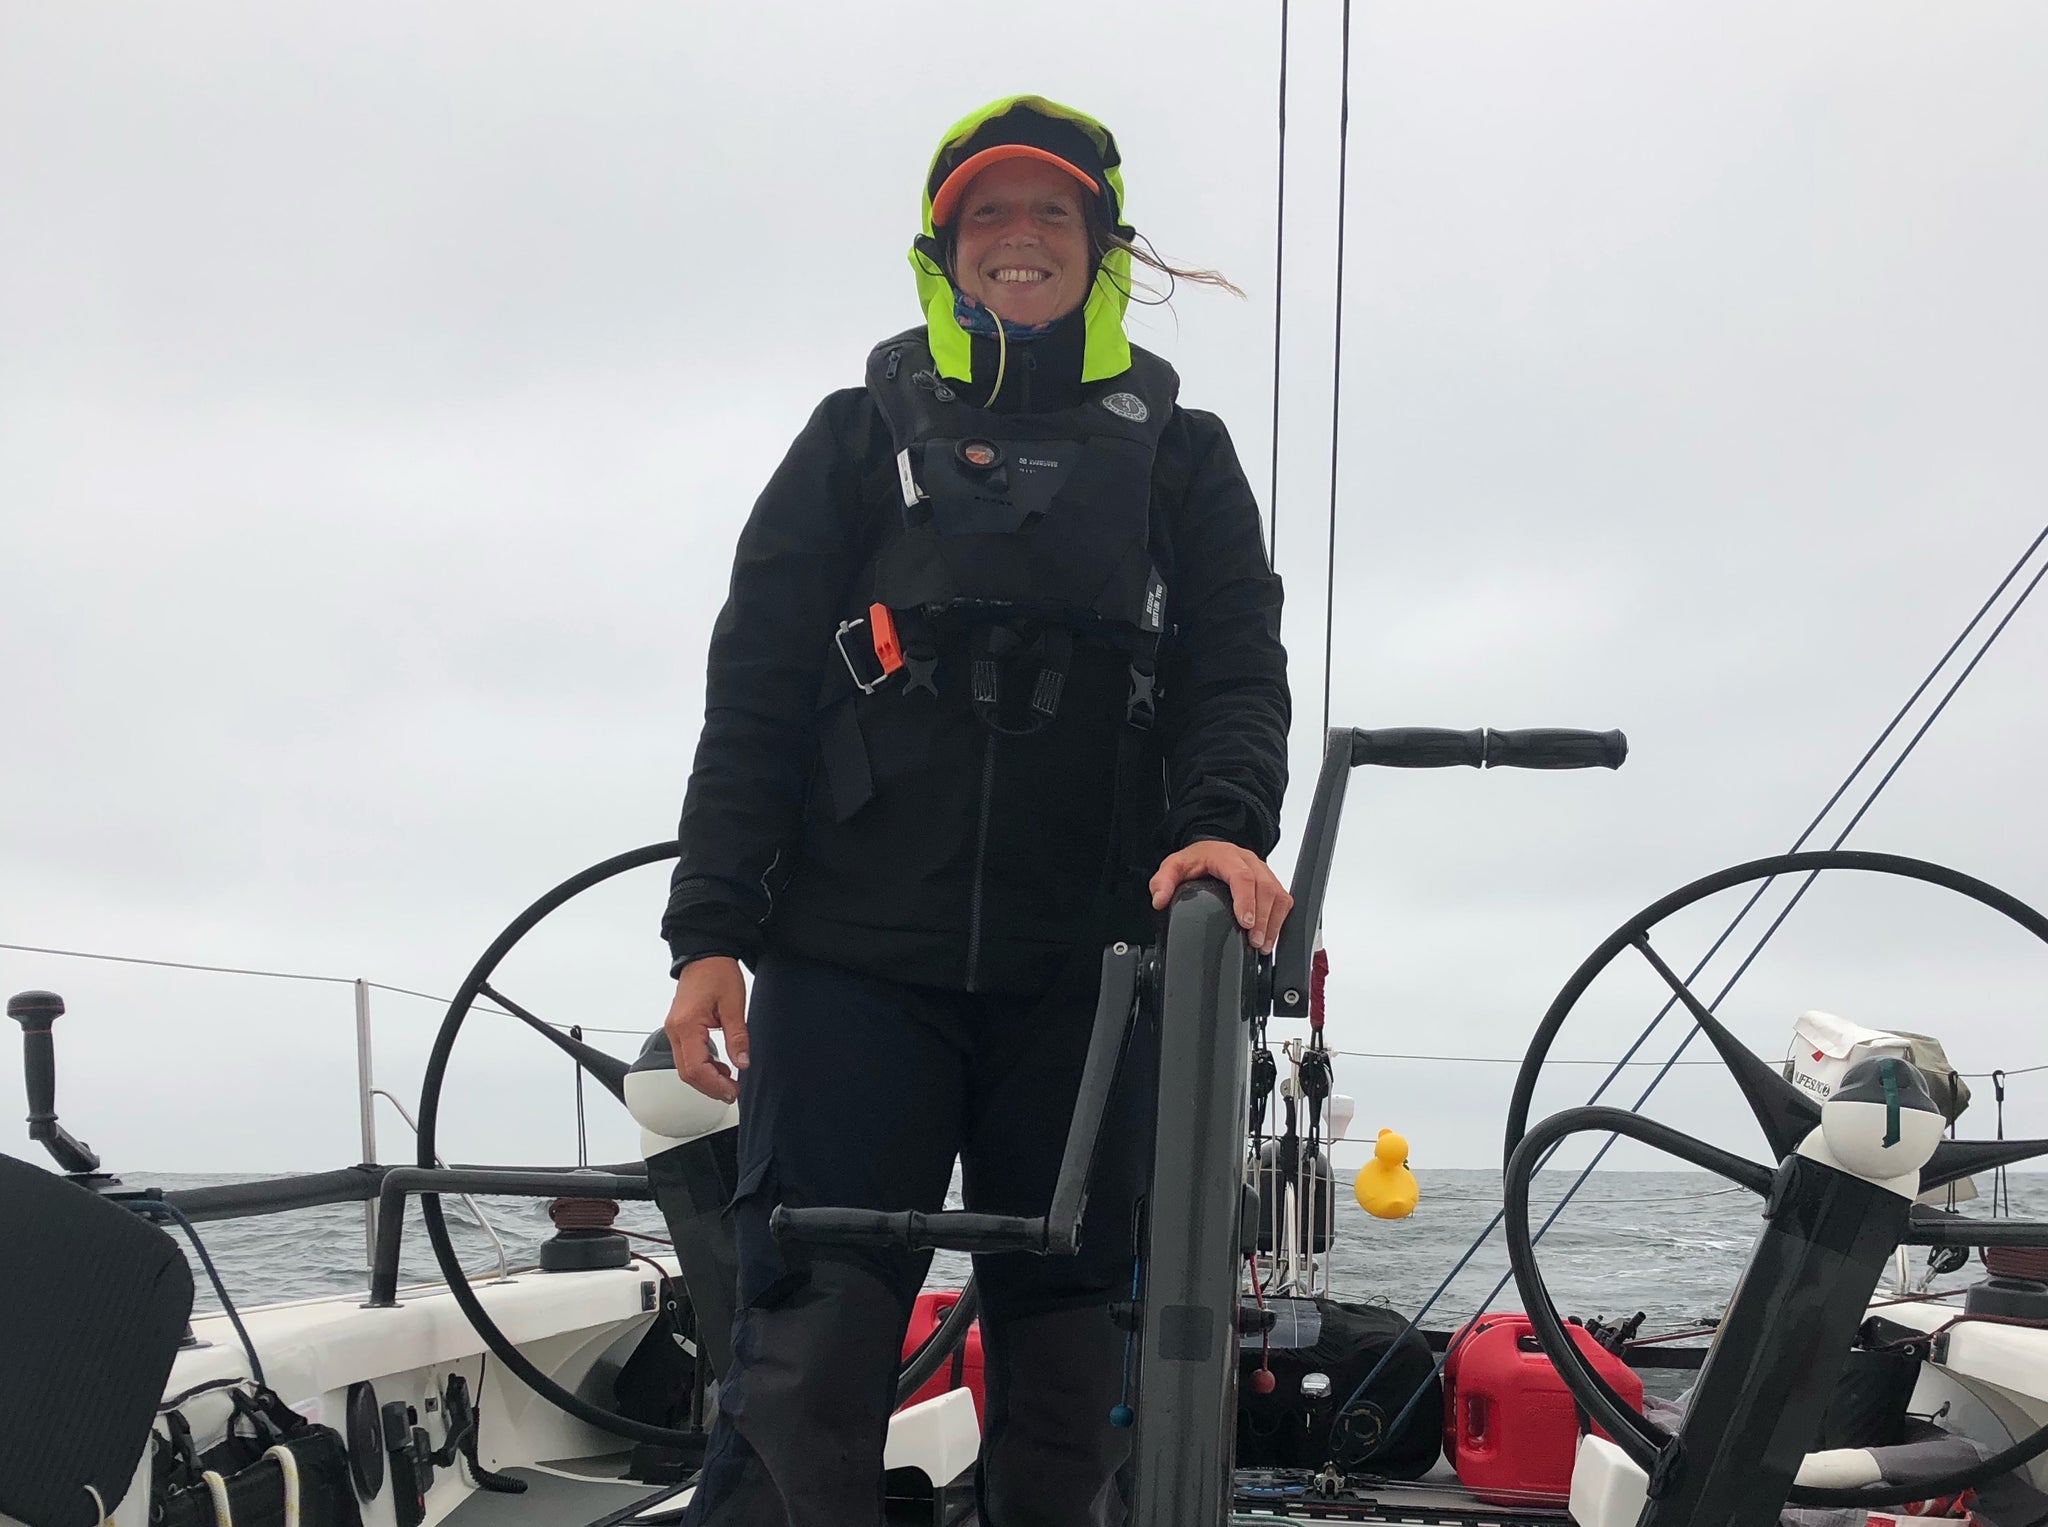 An interview with Pac Cup '22 Rear Commodore - Rebecca Hinden